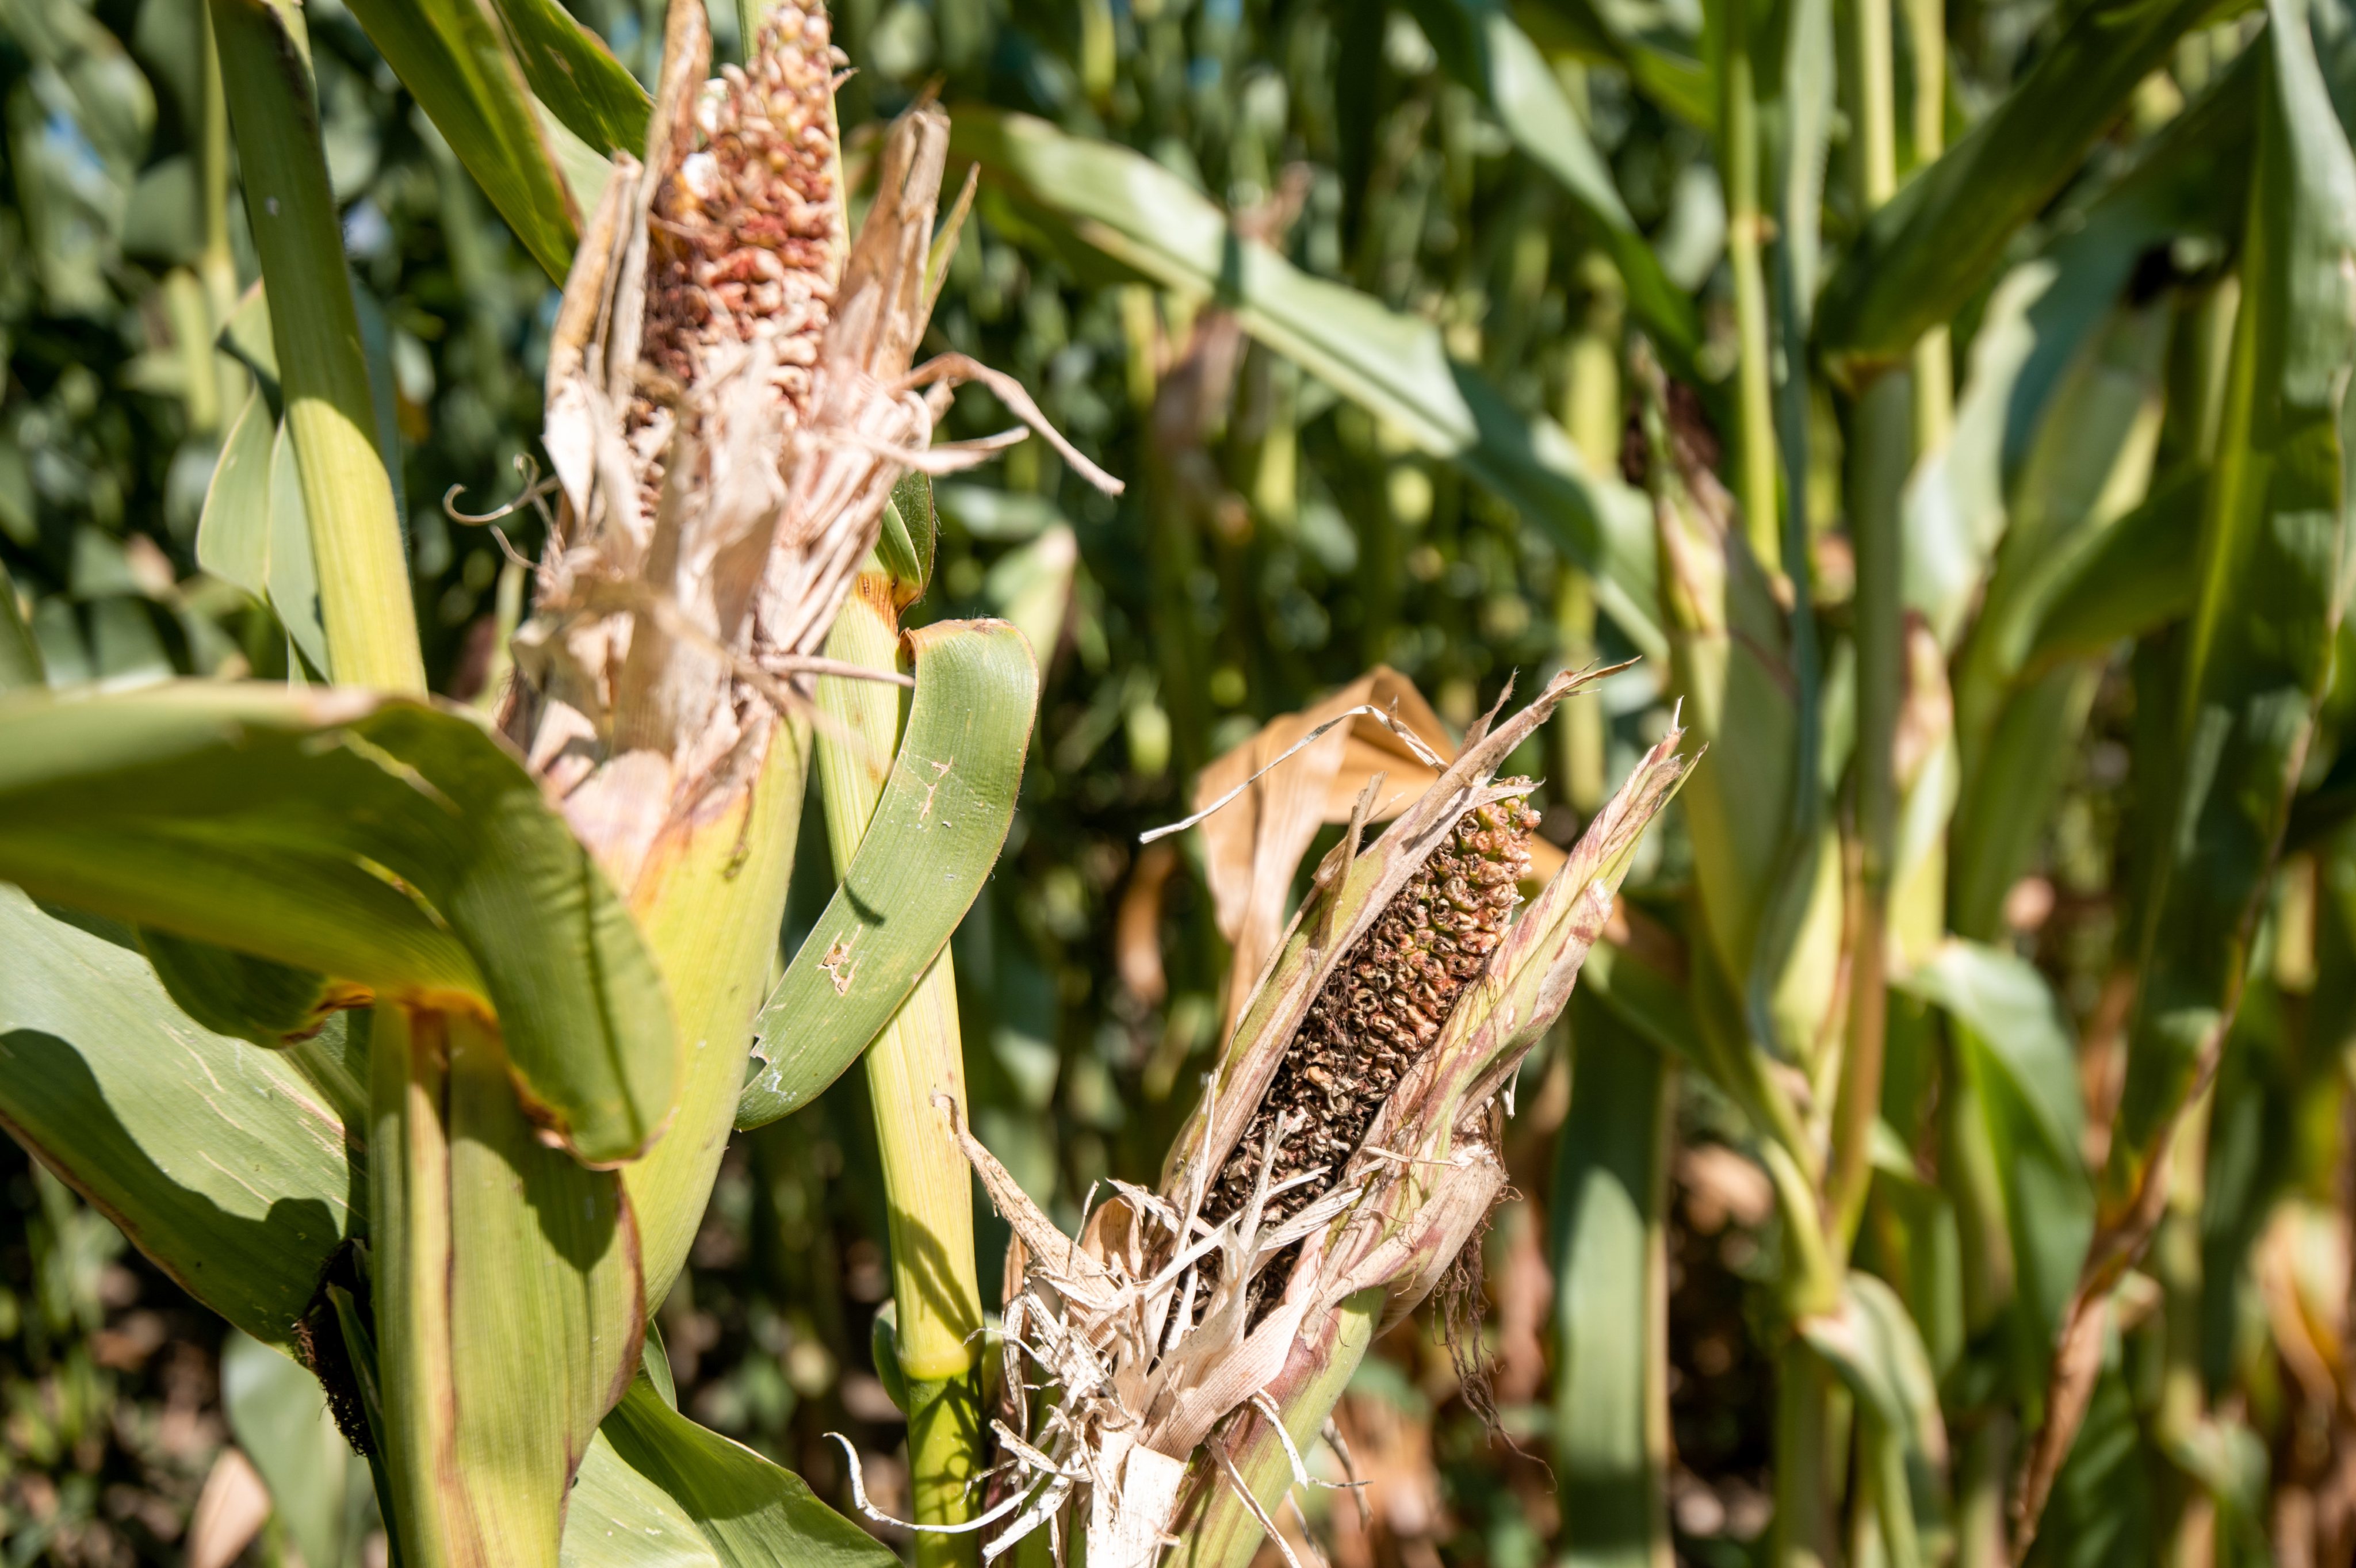 Undeveloped corncobs are seen in a corn field in Rogoza,